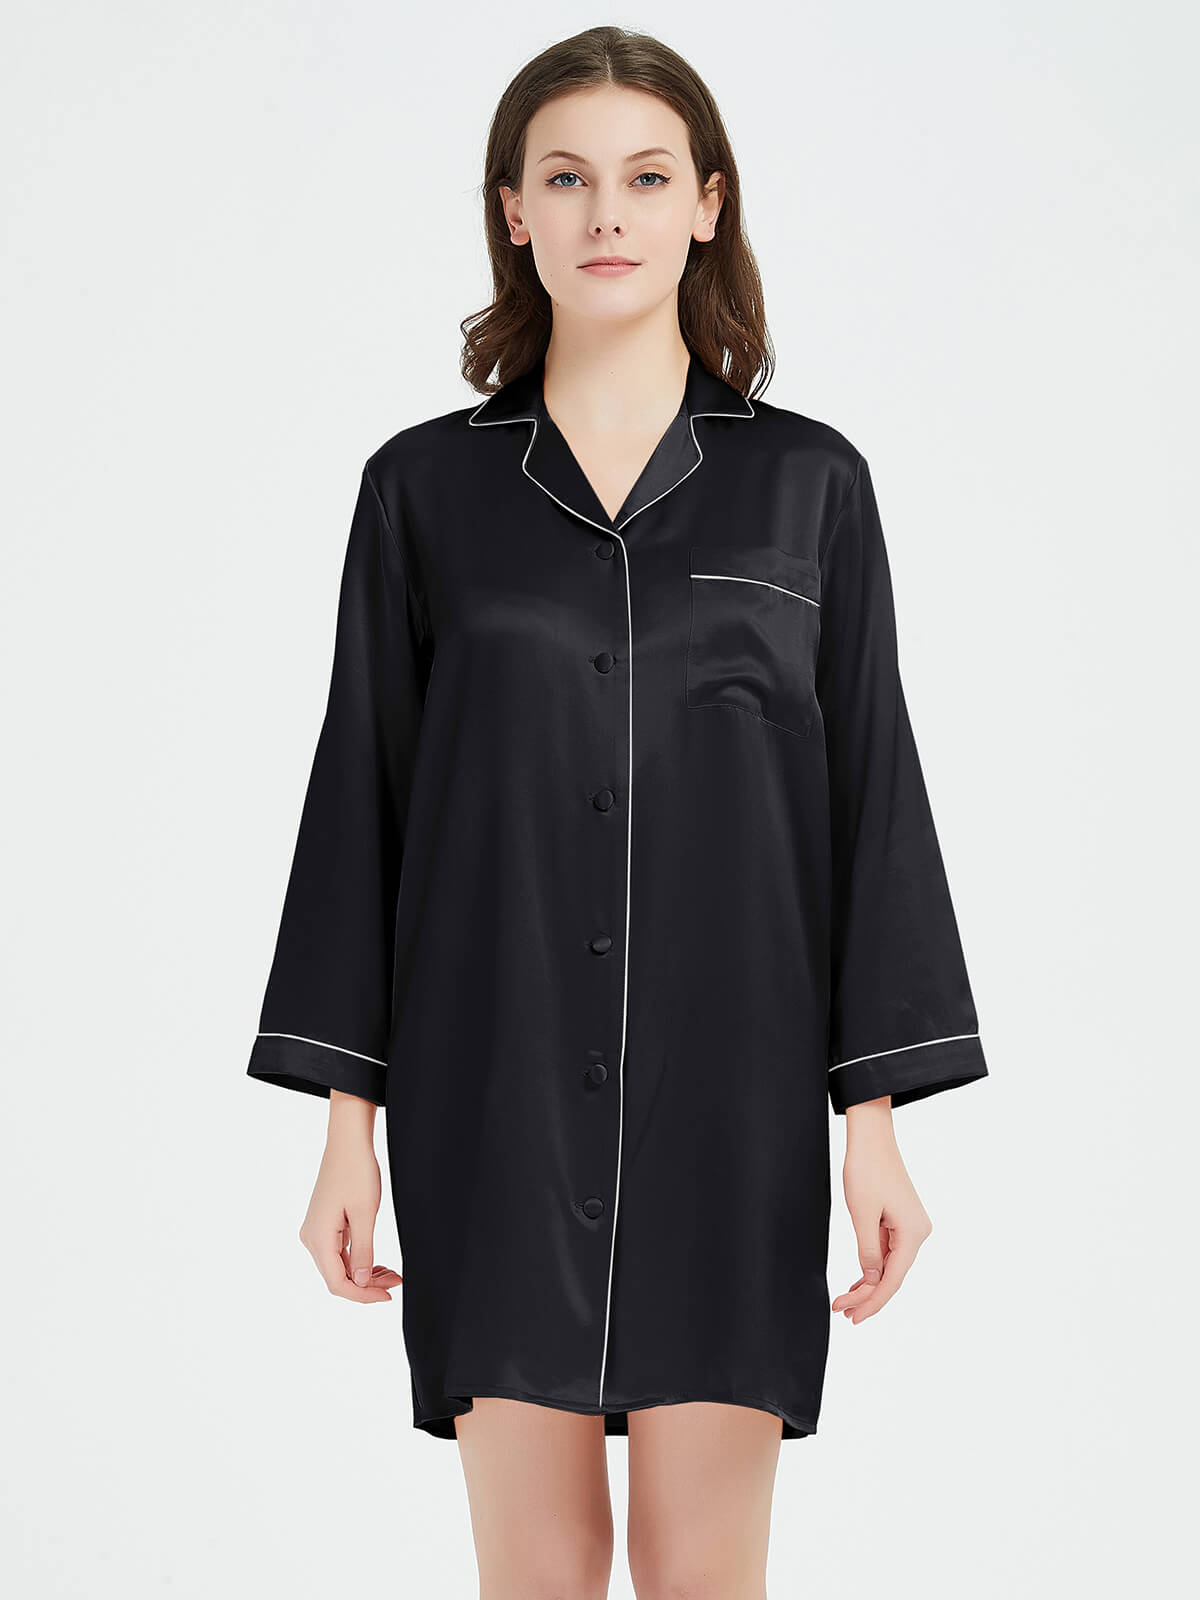 19 Momme Short Sleeved Women Silk Sleep Shirt with Trimming [FS004